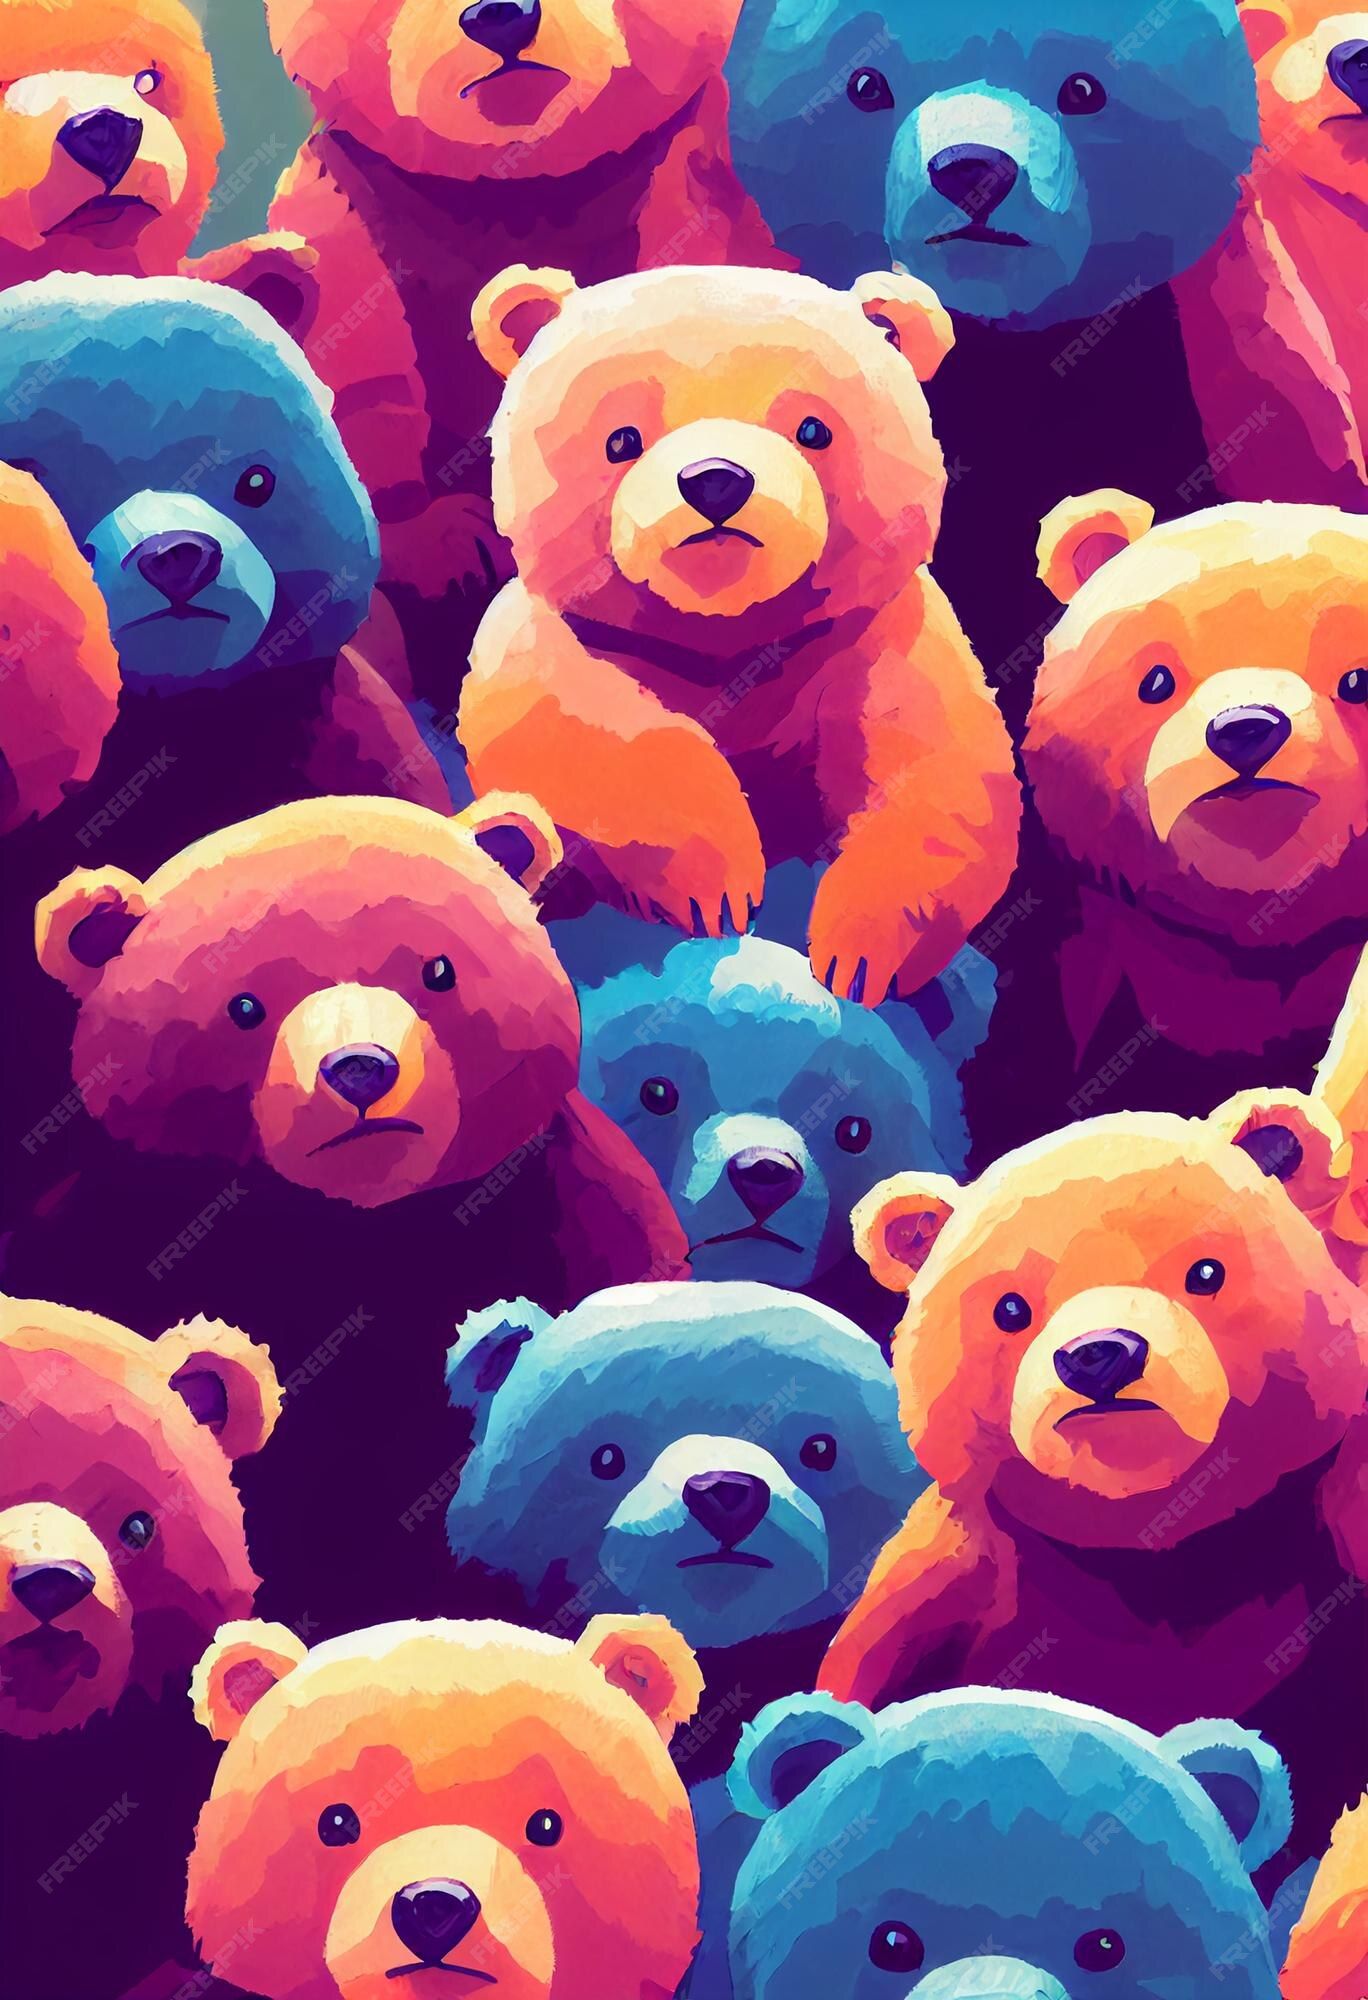 Premium Photo. Group of cute bear for wallpaper and graphic designs 2d illustration